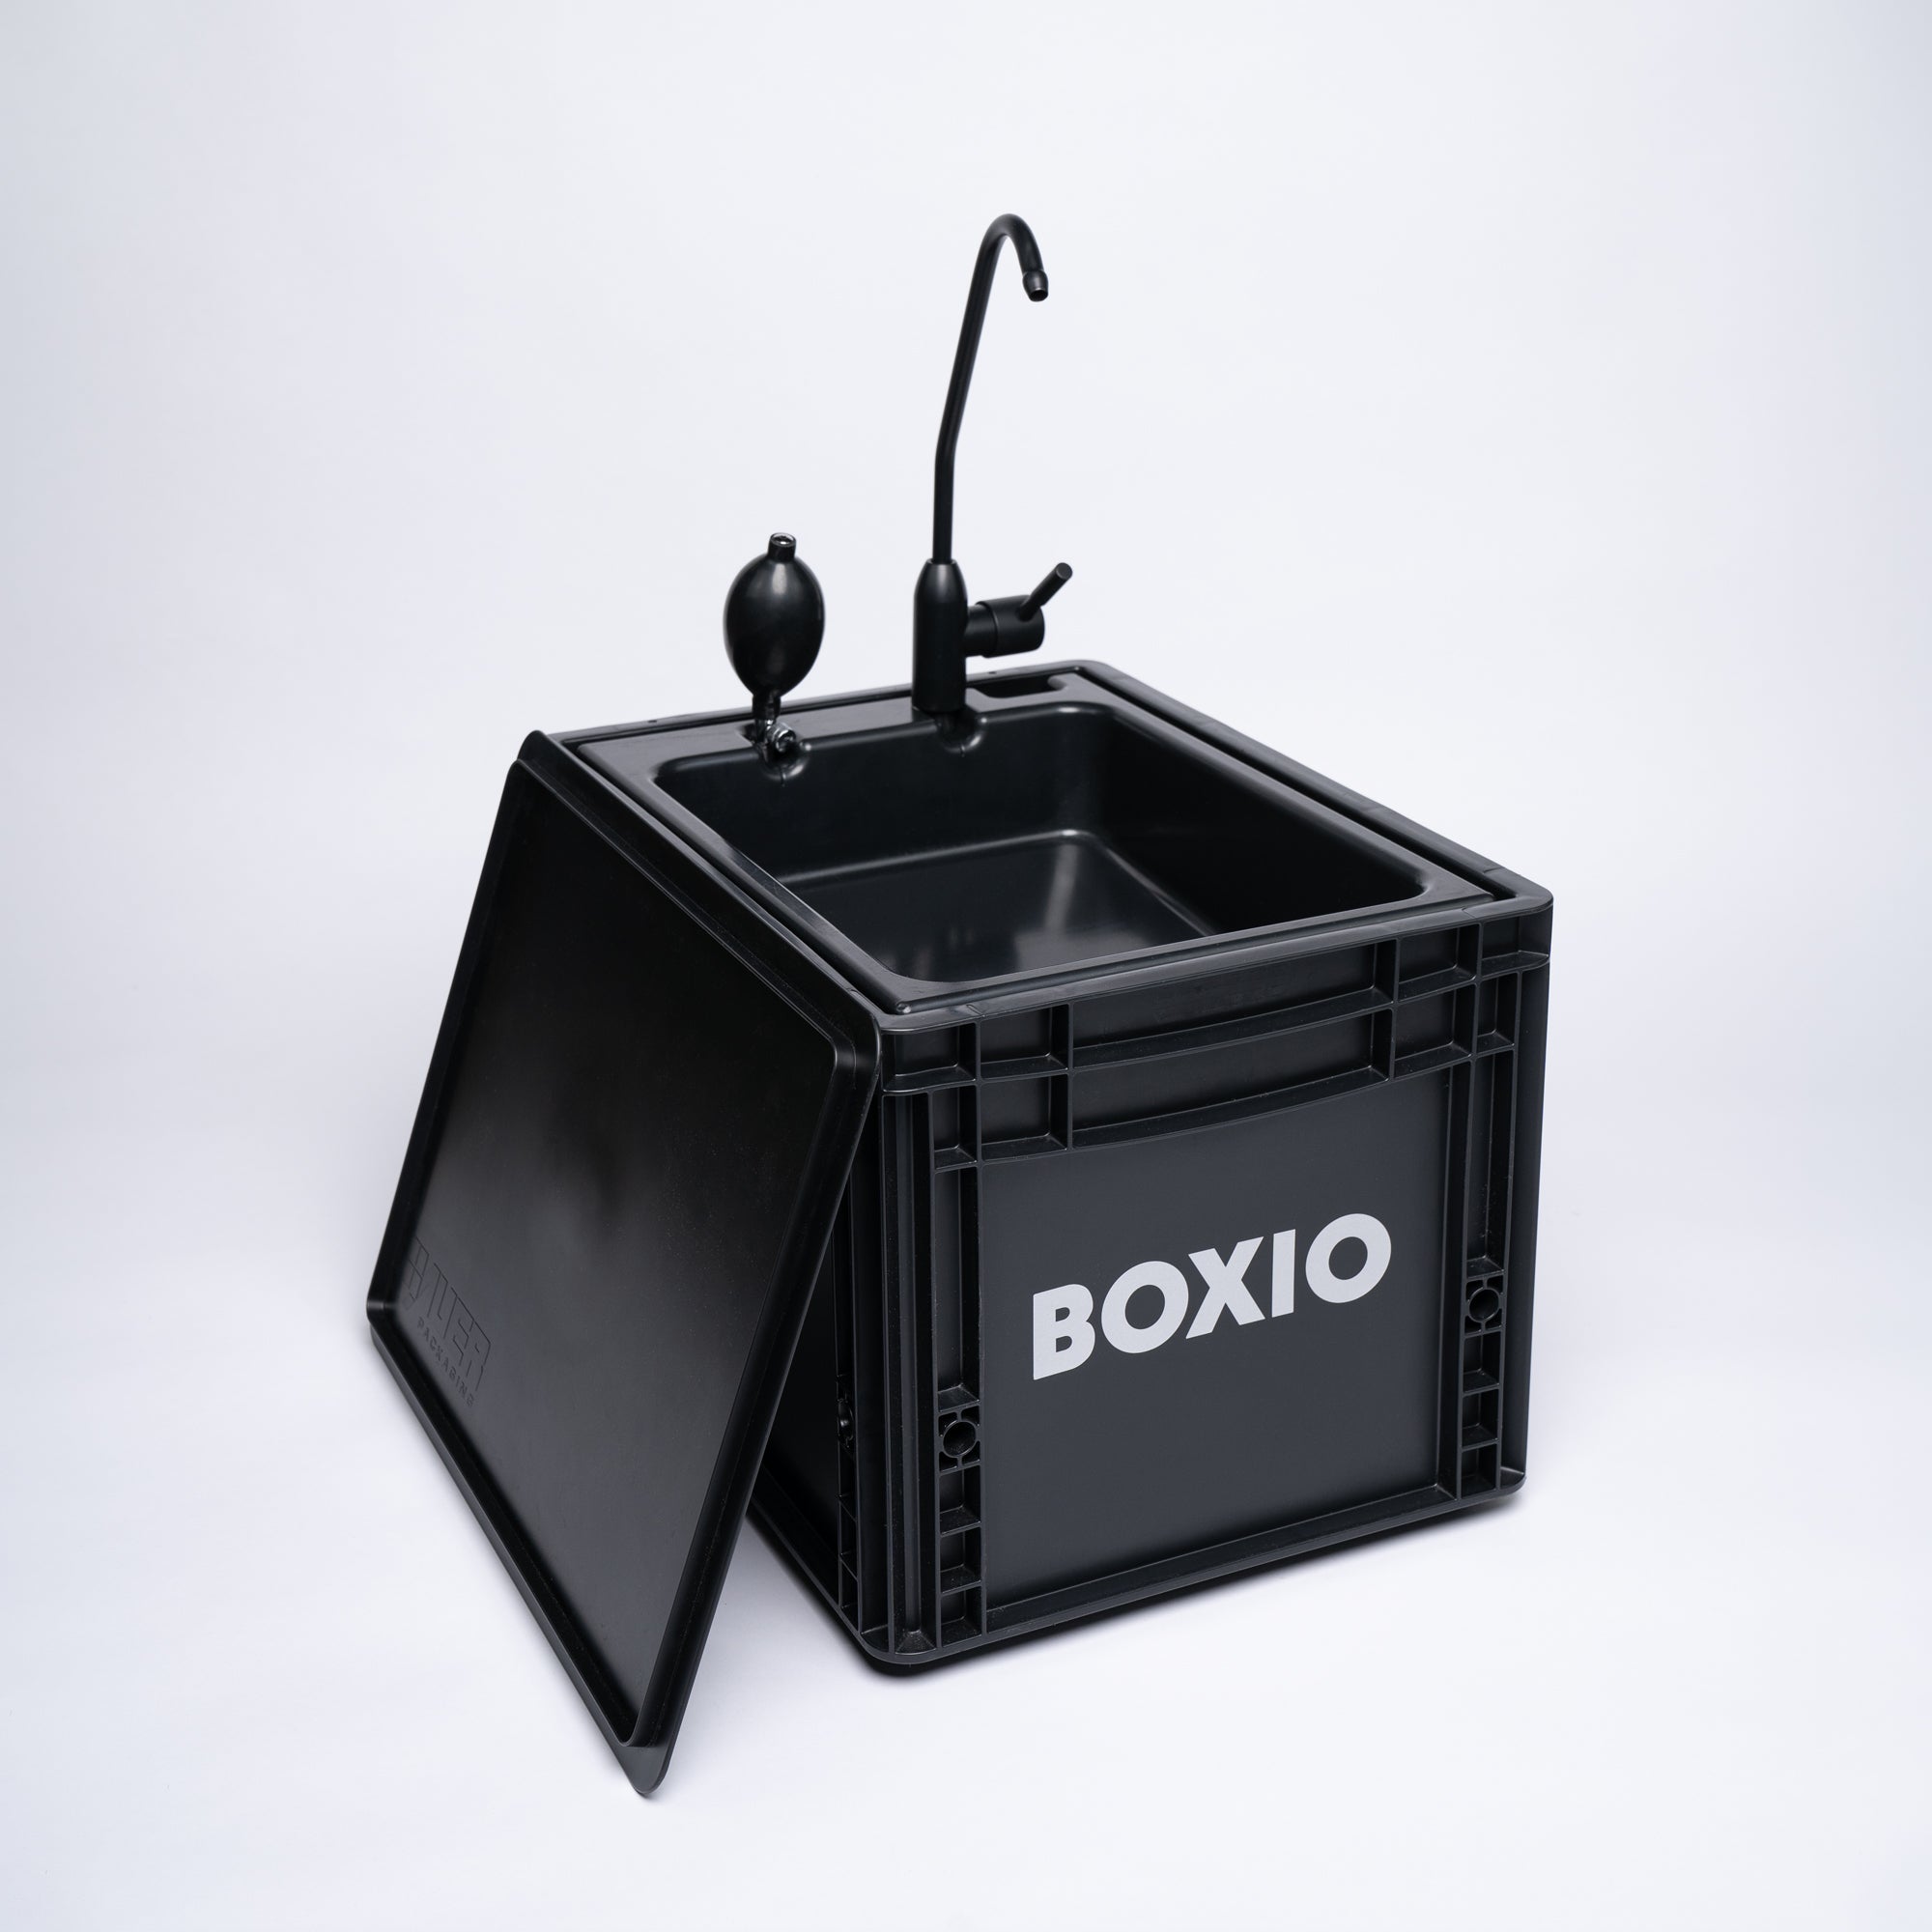 BOXIO Portable Toilet - Convenient Camping Toilet! Compact, Safe, and  Personal Composting Toilet with Convenient Disposal for Camping, RVing,  Boating, Road Trips and Other Recreational Activities